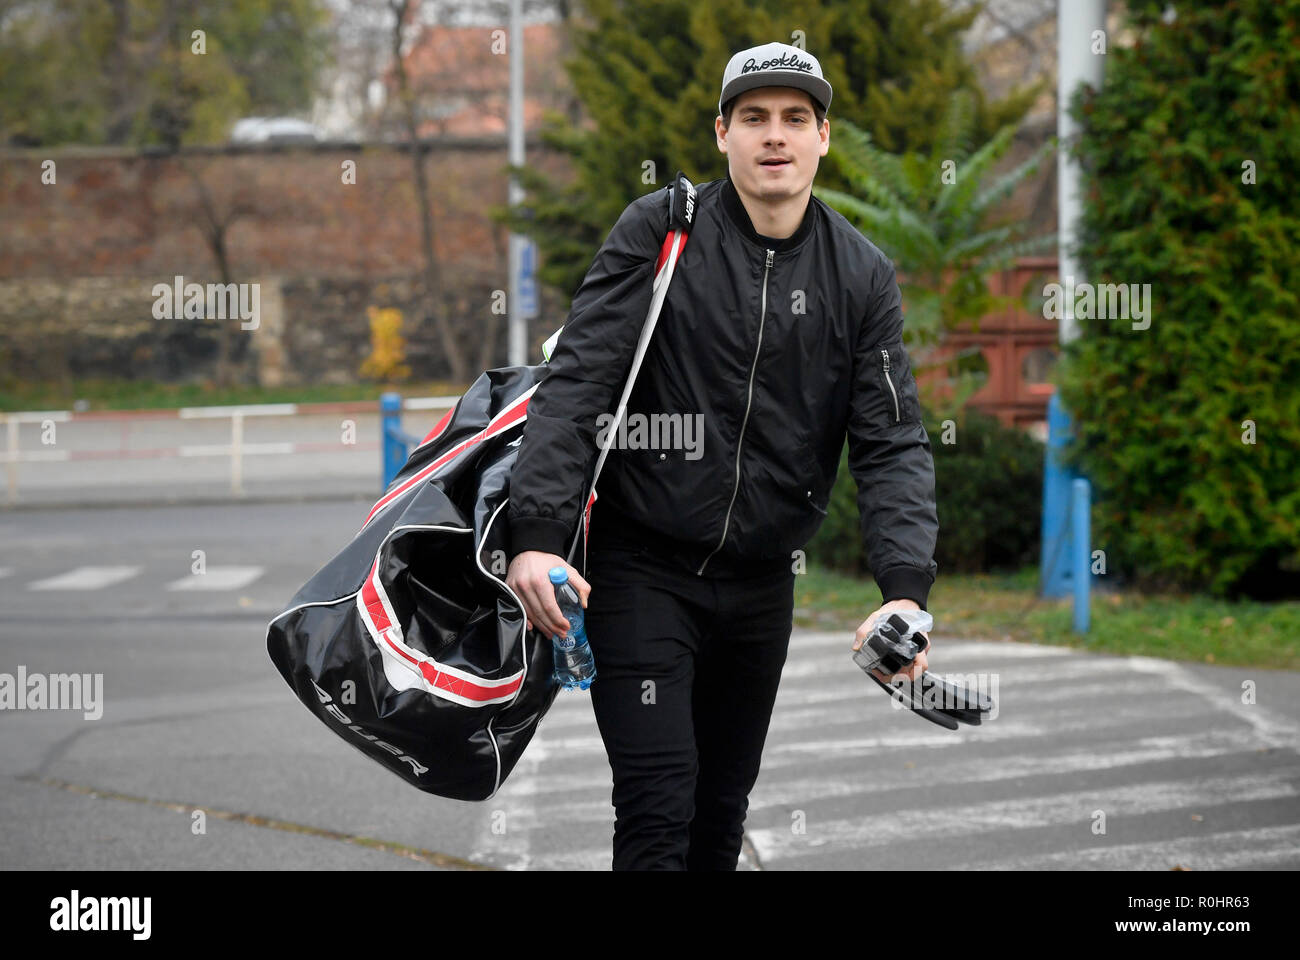 Prague, Czech Republic. 05th Nov, 2018. Four newcomers, Jan Stencel, Radim Zohorna, Radovan Pavlik and Patrik Zdrahal, are in the Czech national ice-hockey team's roster for the Euro Hockey Tour series' Karjala tournament to be held in Prague and Helsinki on November 8-11, new coach Milos Riha announced in Prague, Czech Republic, November 5, 2018. Hockey player David Tomasek (pictured) comes to the training session. Credit: Vit Simanek/CTK Photo/Alamy Live News Stock Photo